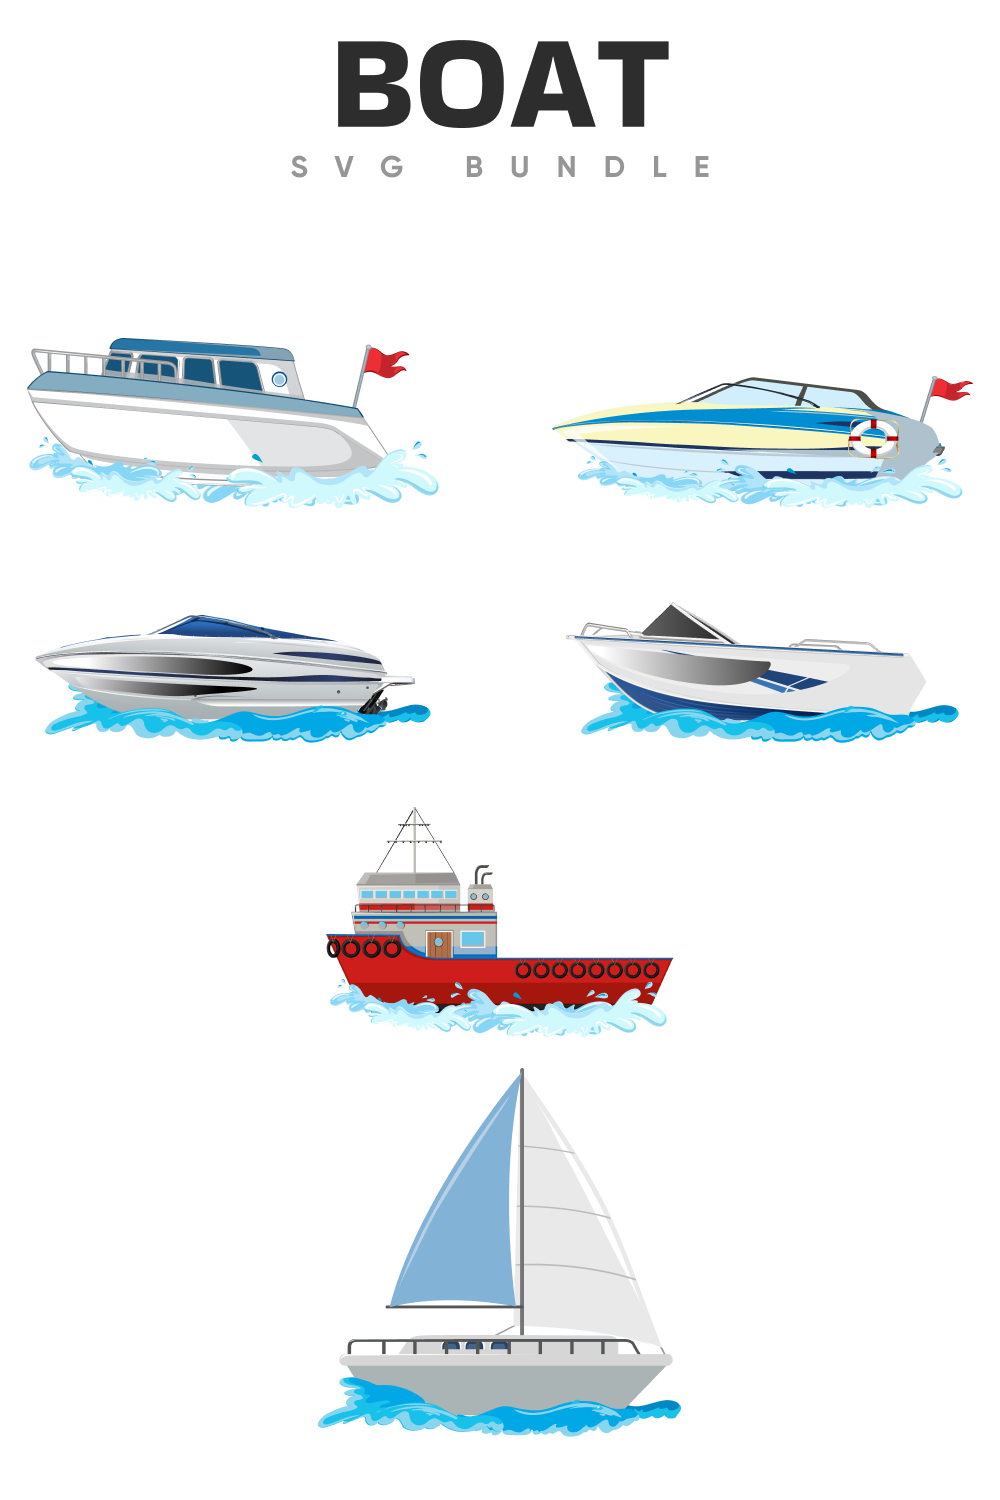 Diverse light boats in the different sizes.